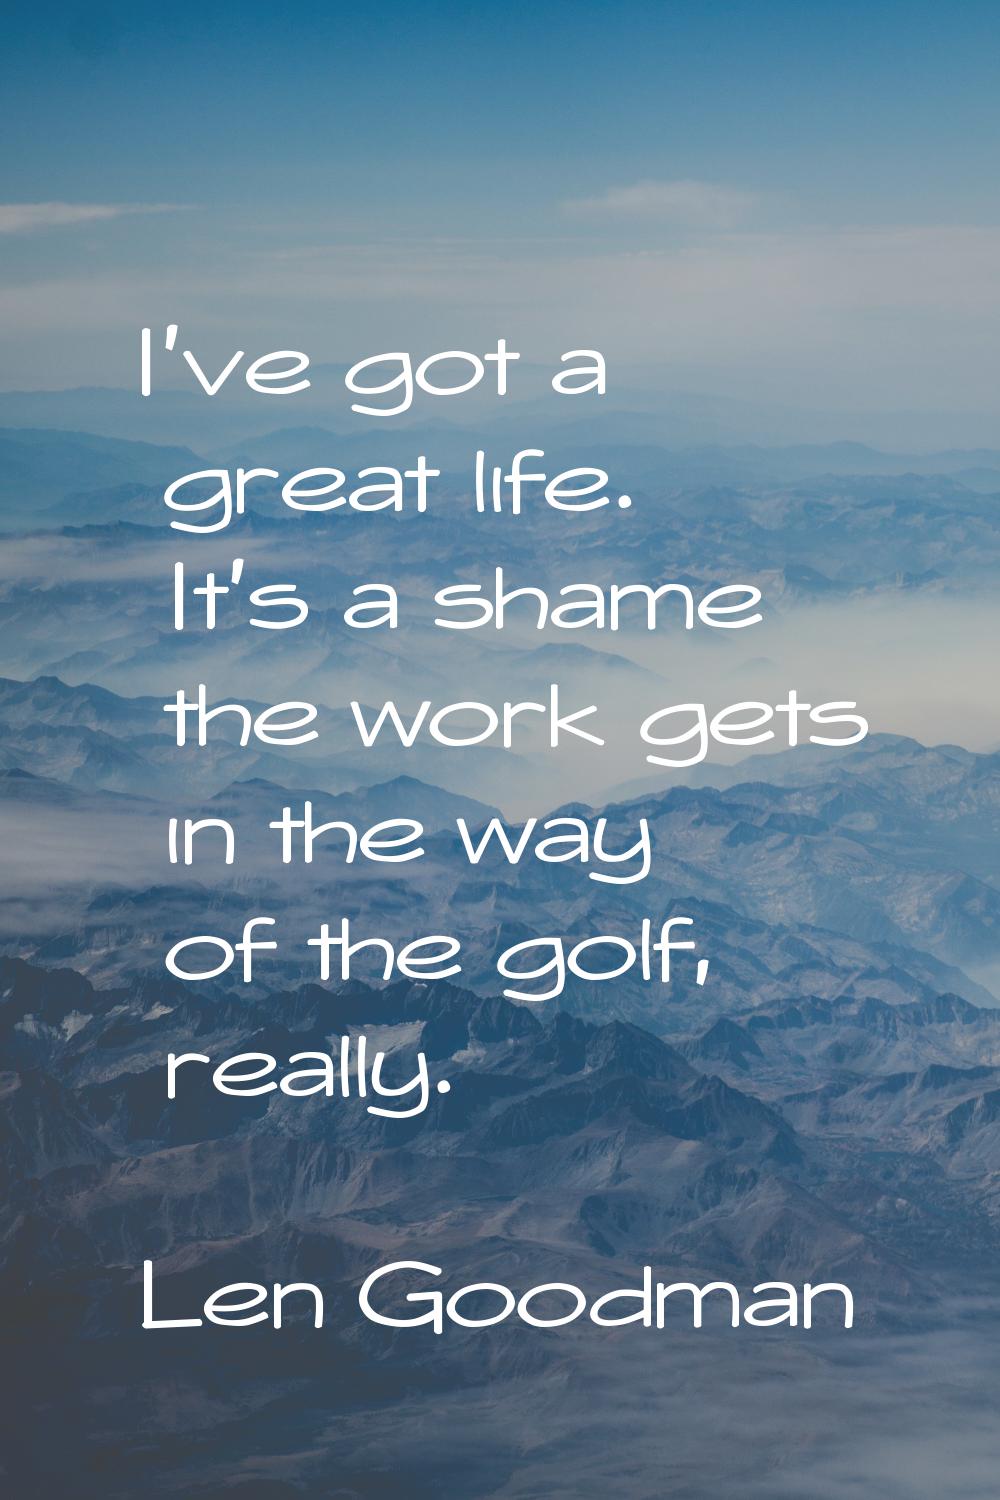 I've got a great life. It's a shame the work gets in the way of the golf, really.